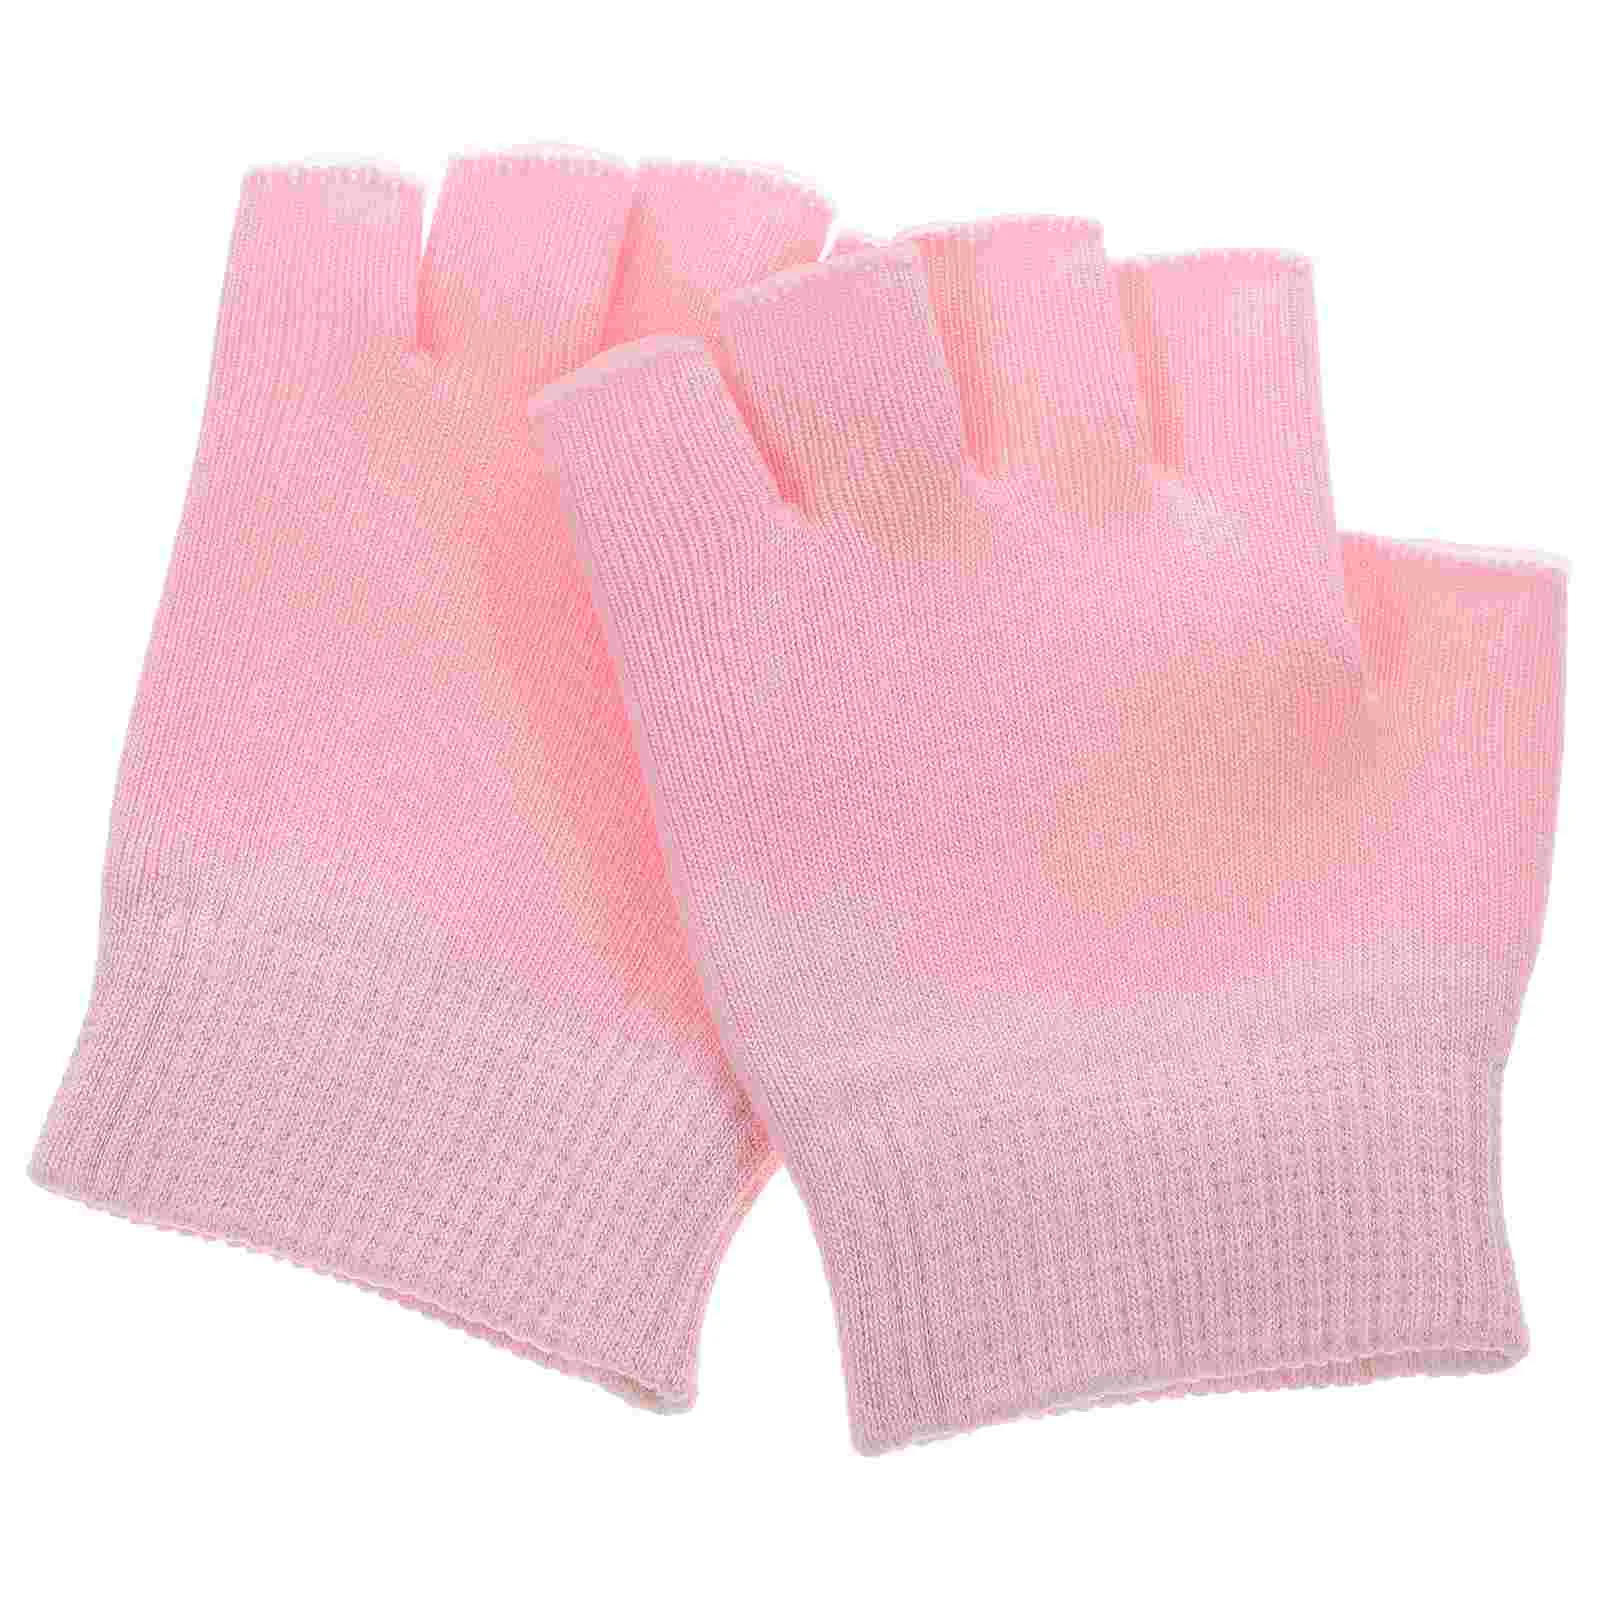 

Gloves Moisturizing Hand Mitten Spa Rough Cracked Skin Dry Inner Vitamins Oils Essential Infused Lining Calluses Moisturing